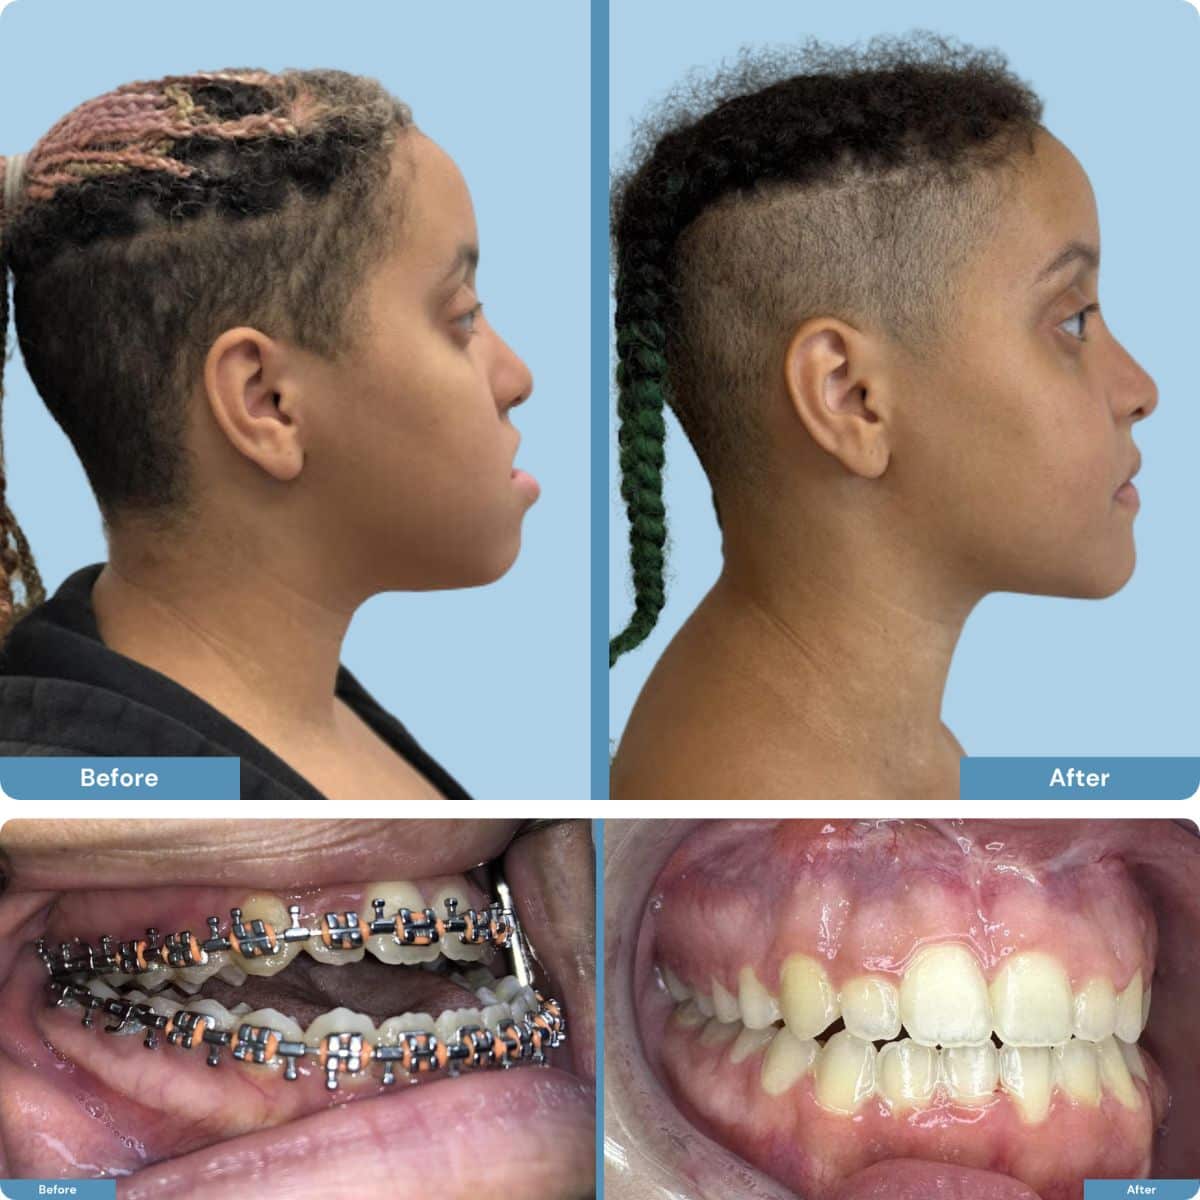 Before and after orthognathic jaw surgery on young person